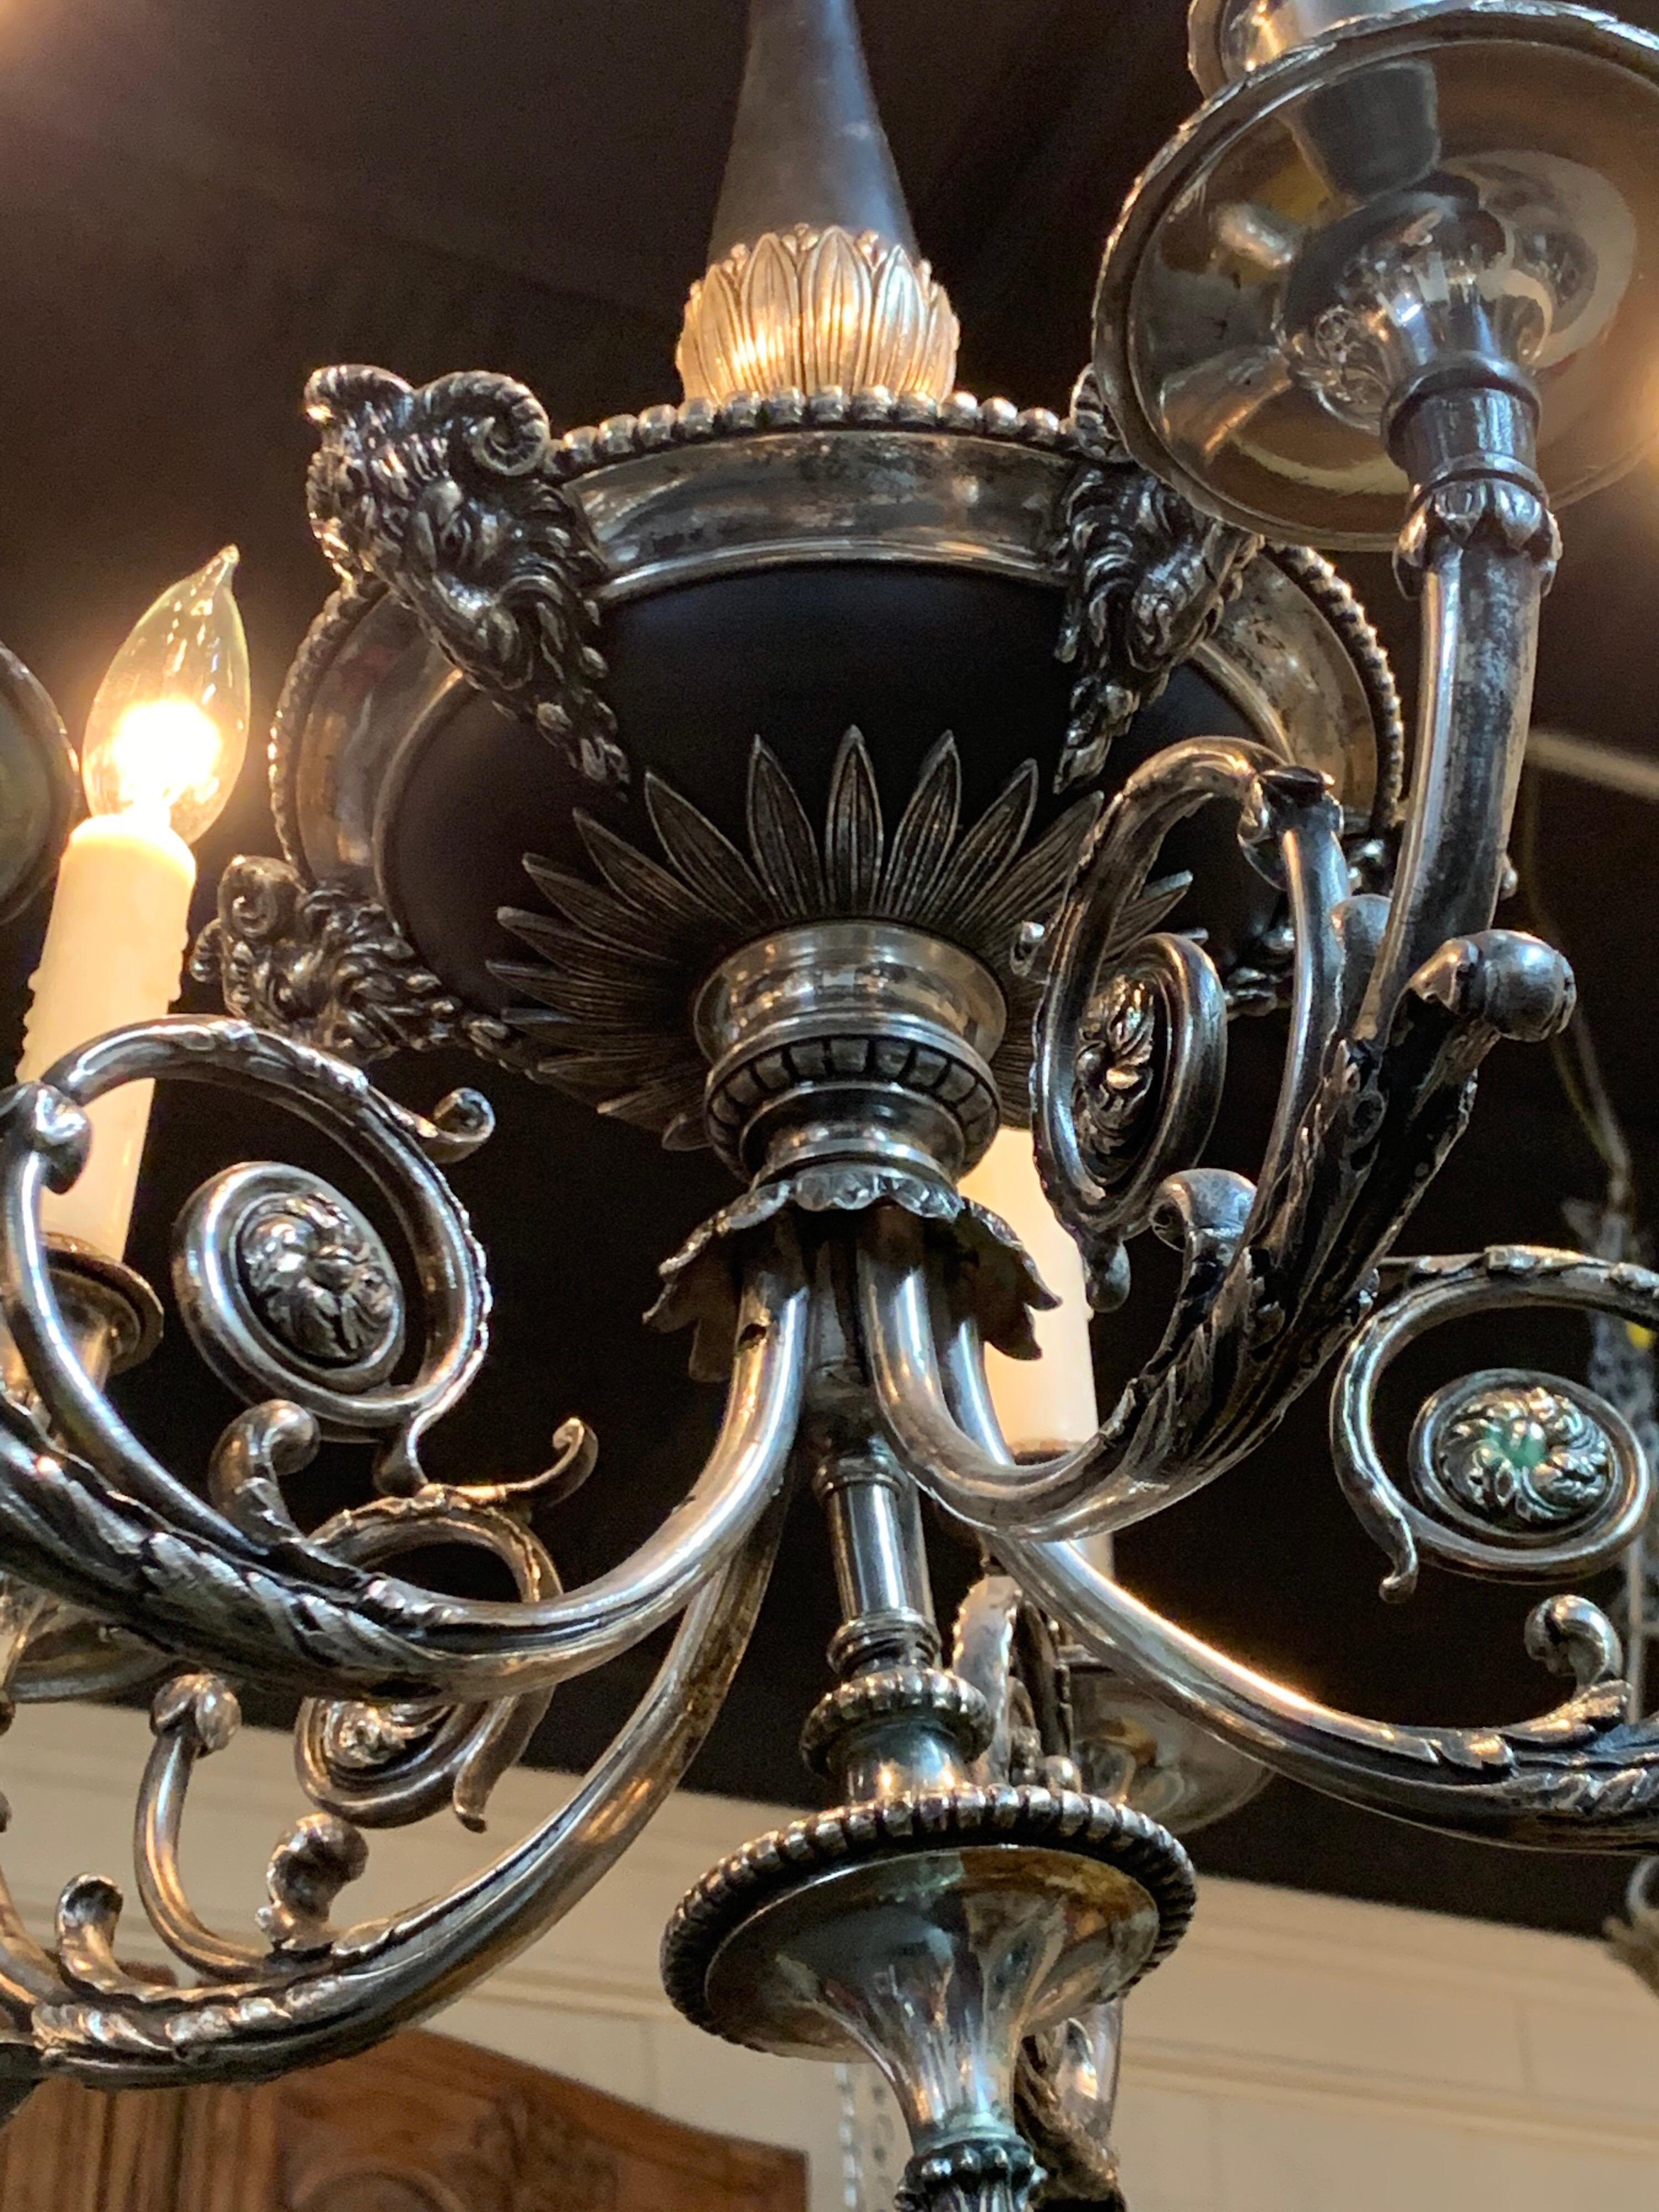 Elegant 19th century neoclassical style silvered over bronze tole chandelier. Beautiful decorative details, including rams heads on the base. Very unique!